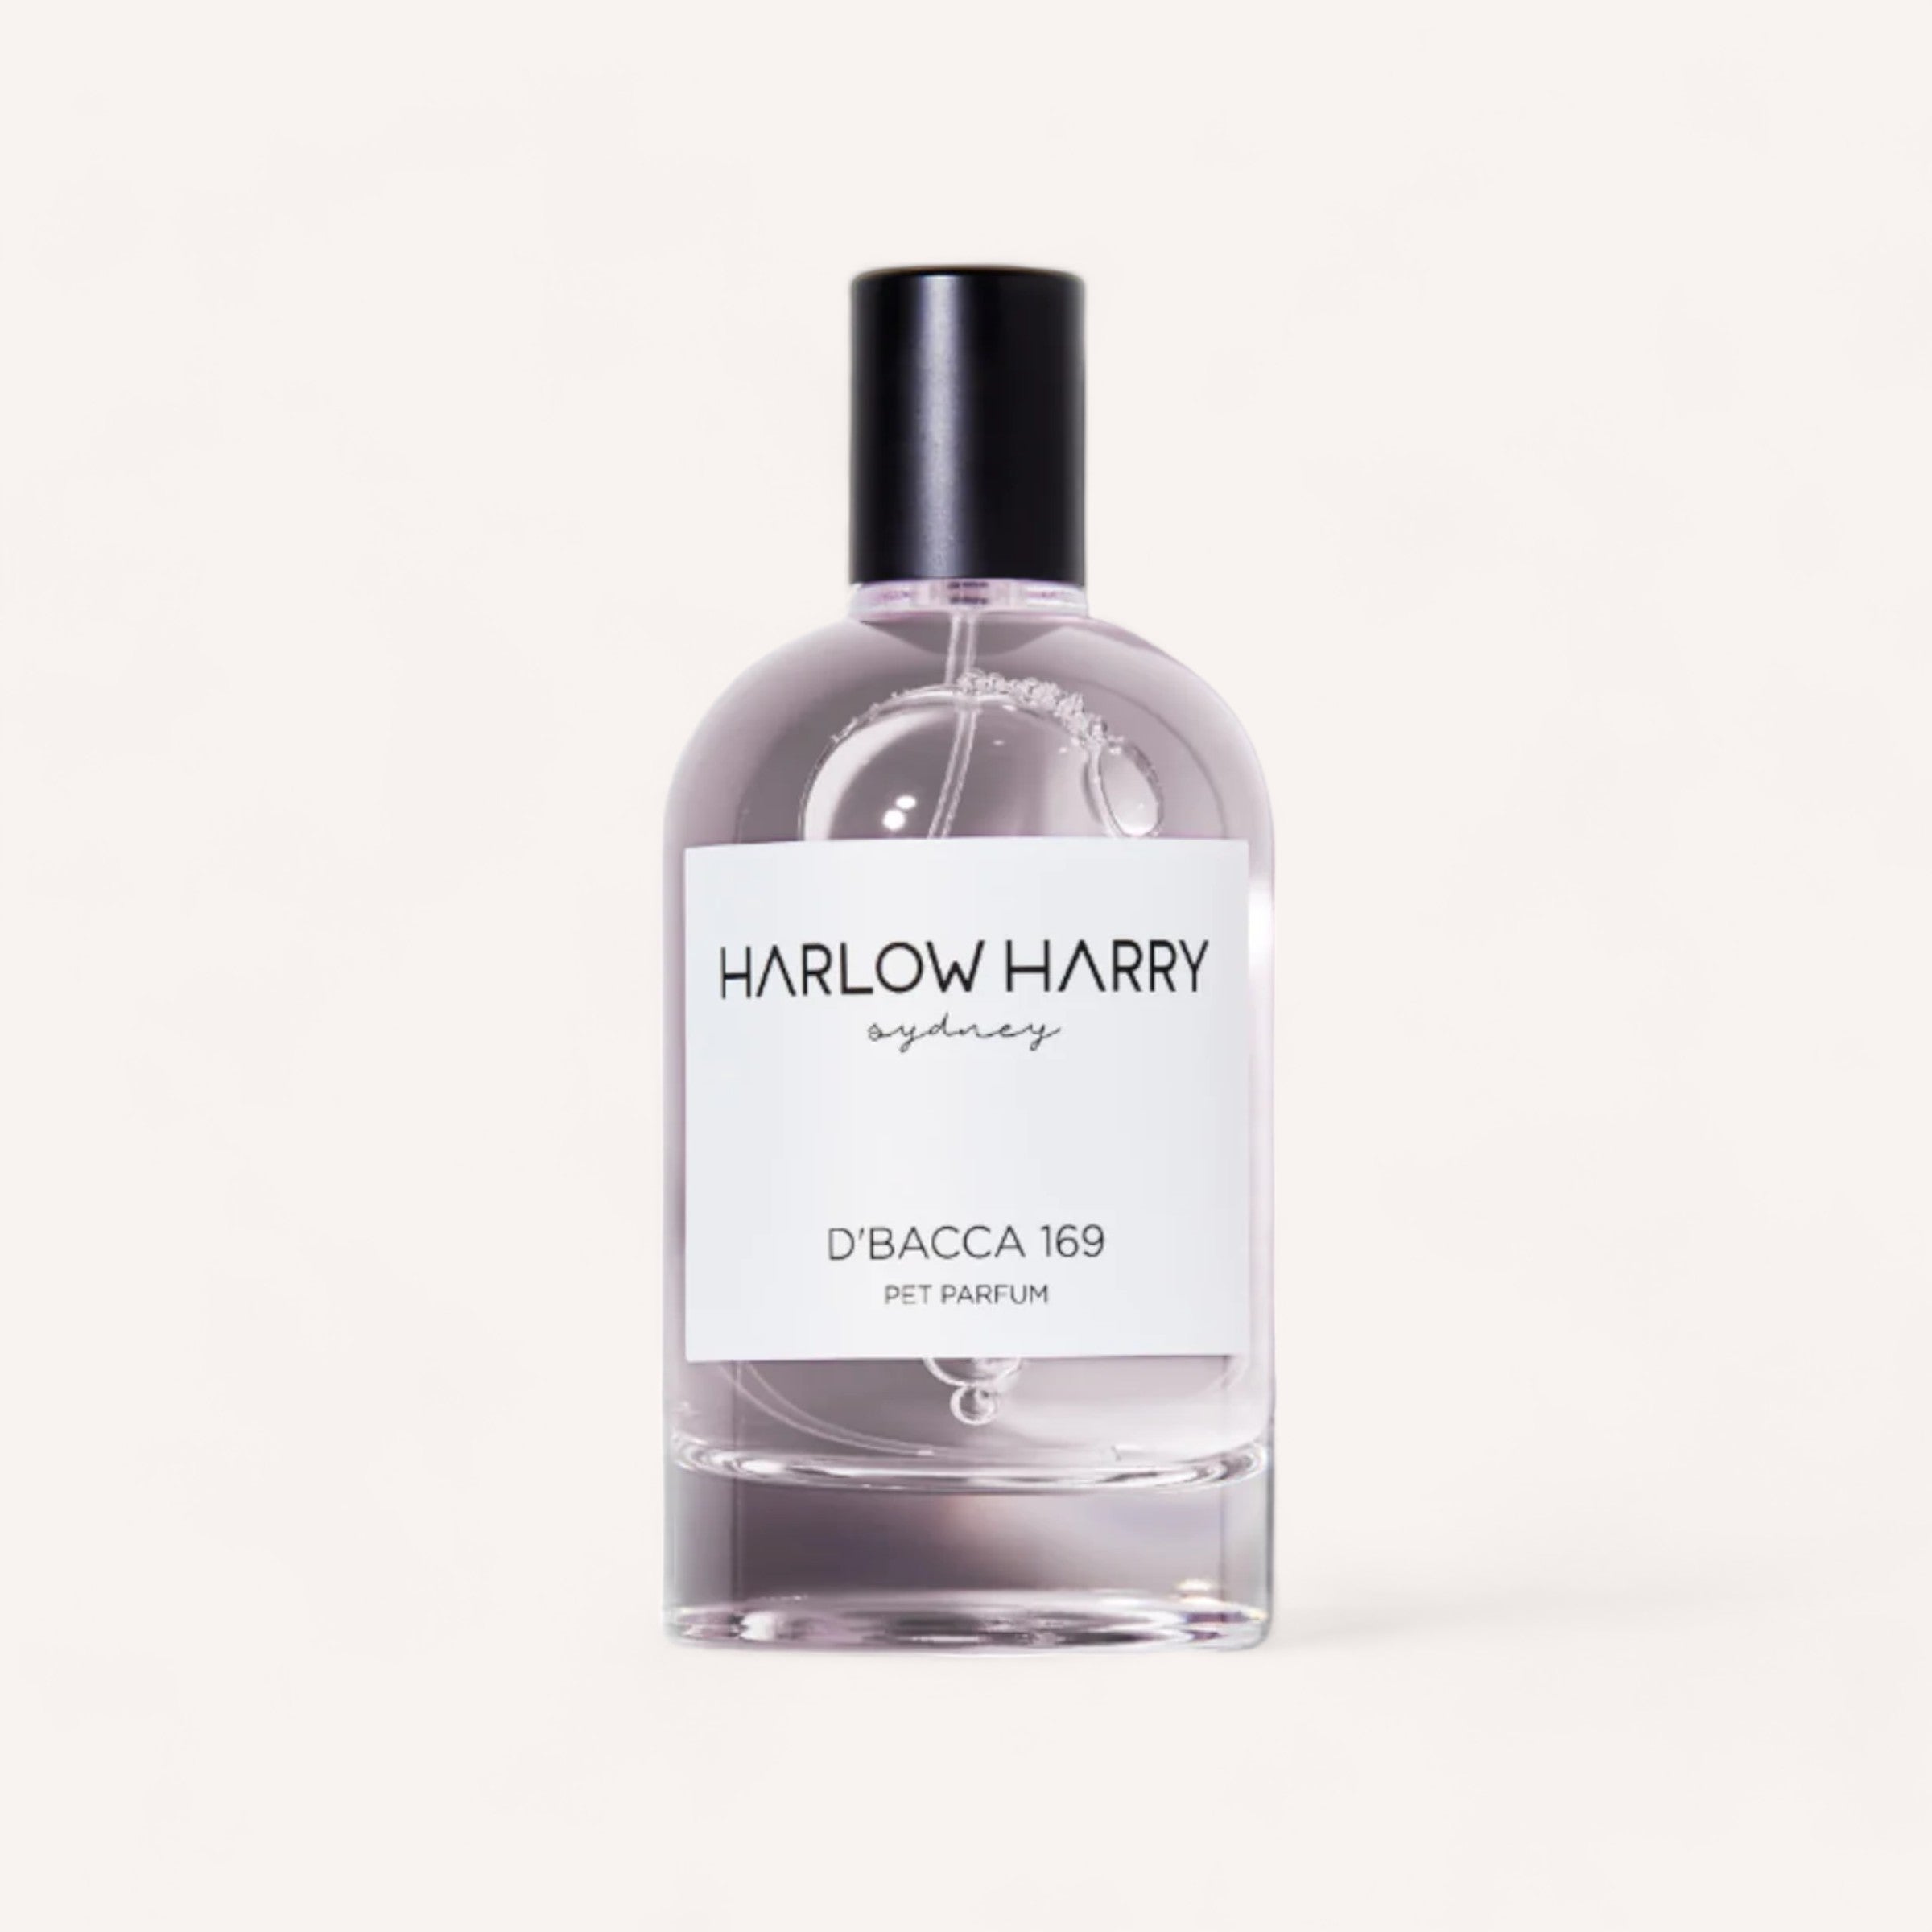 A sleek bottle of D'bacca 169 Dog Perfume by Harlow Harry with cedar musky notes against a clean, white background.